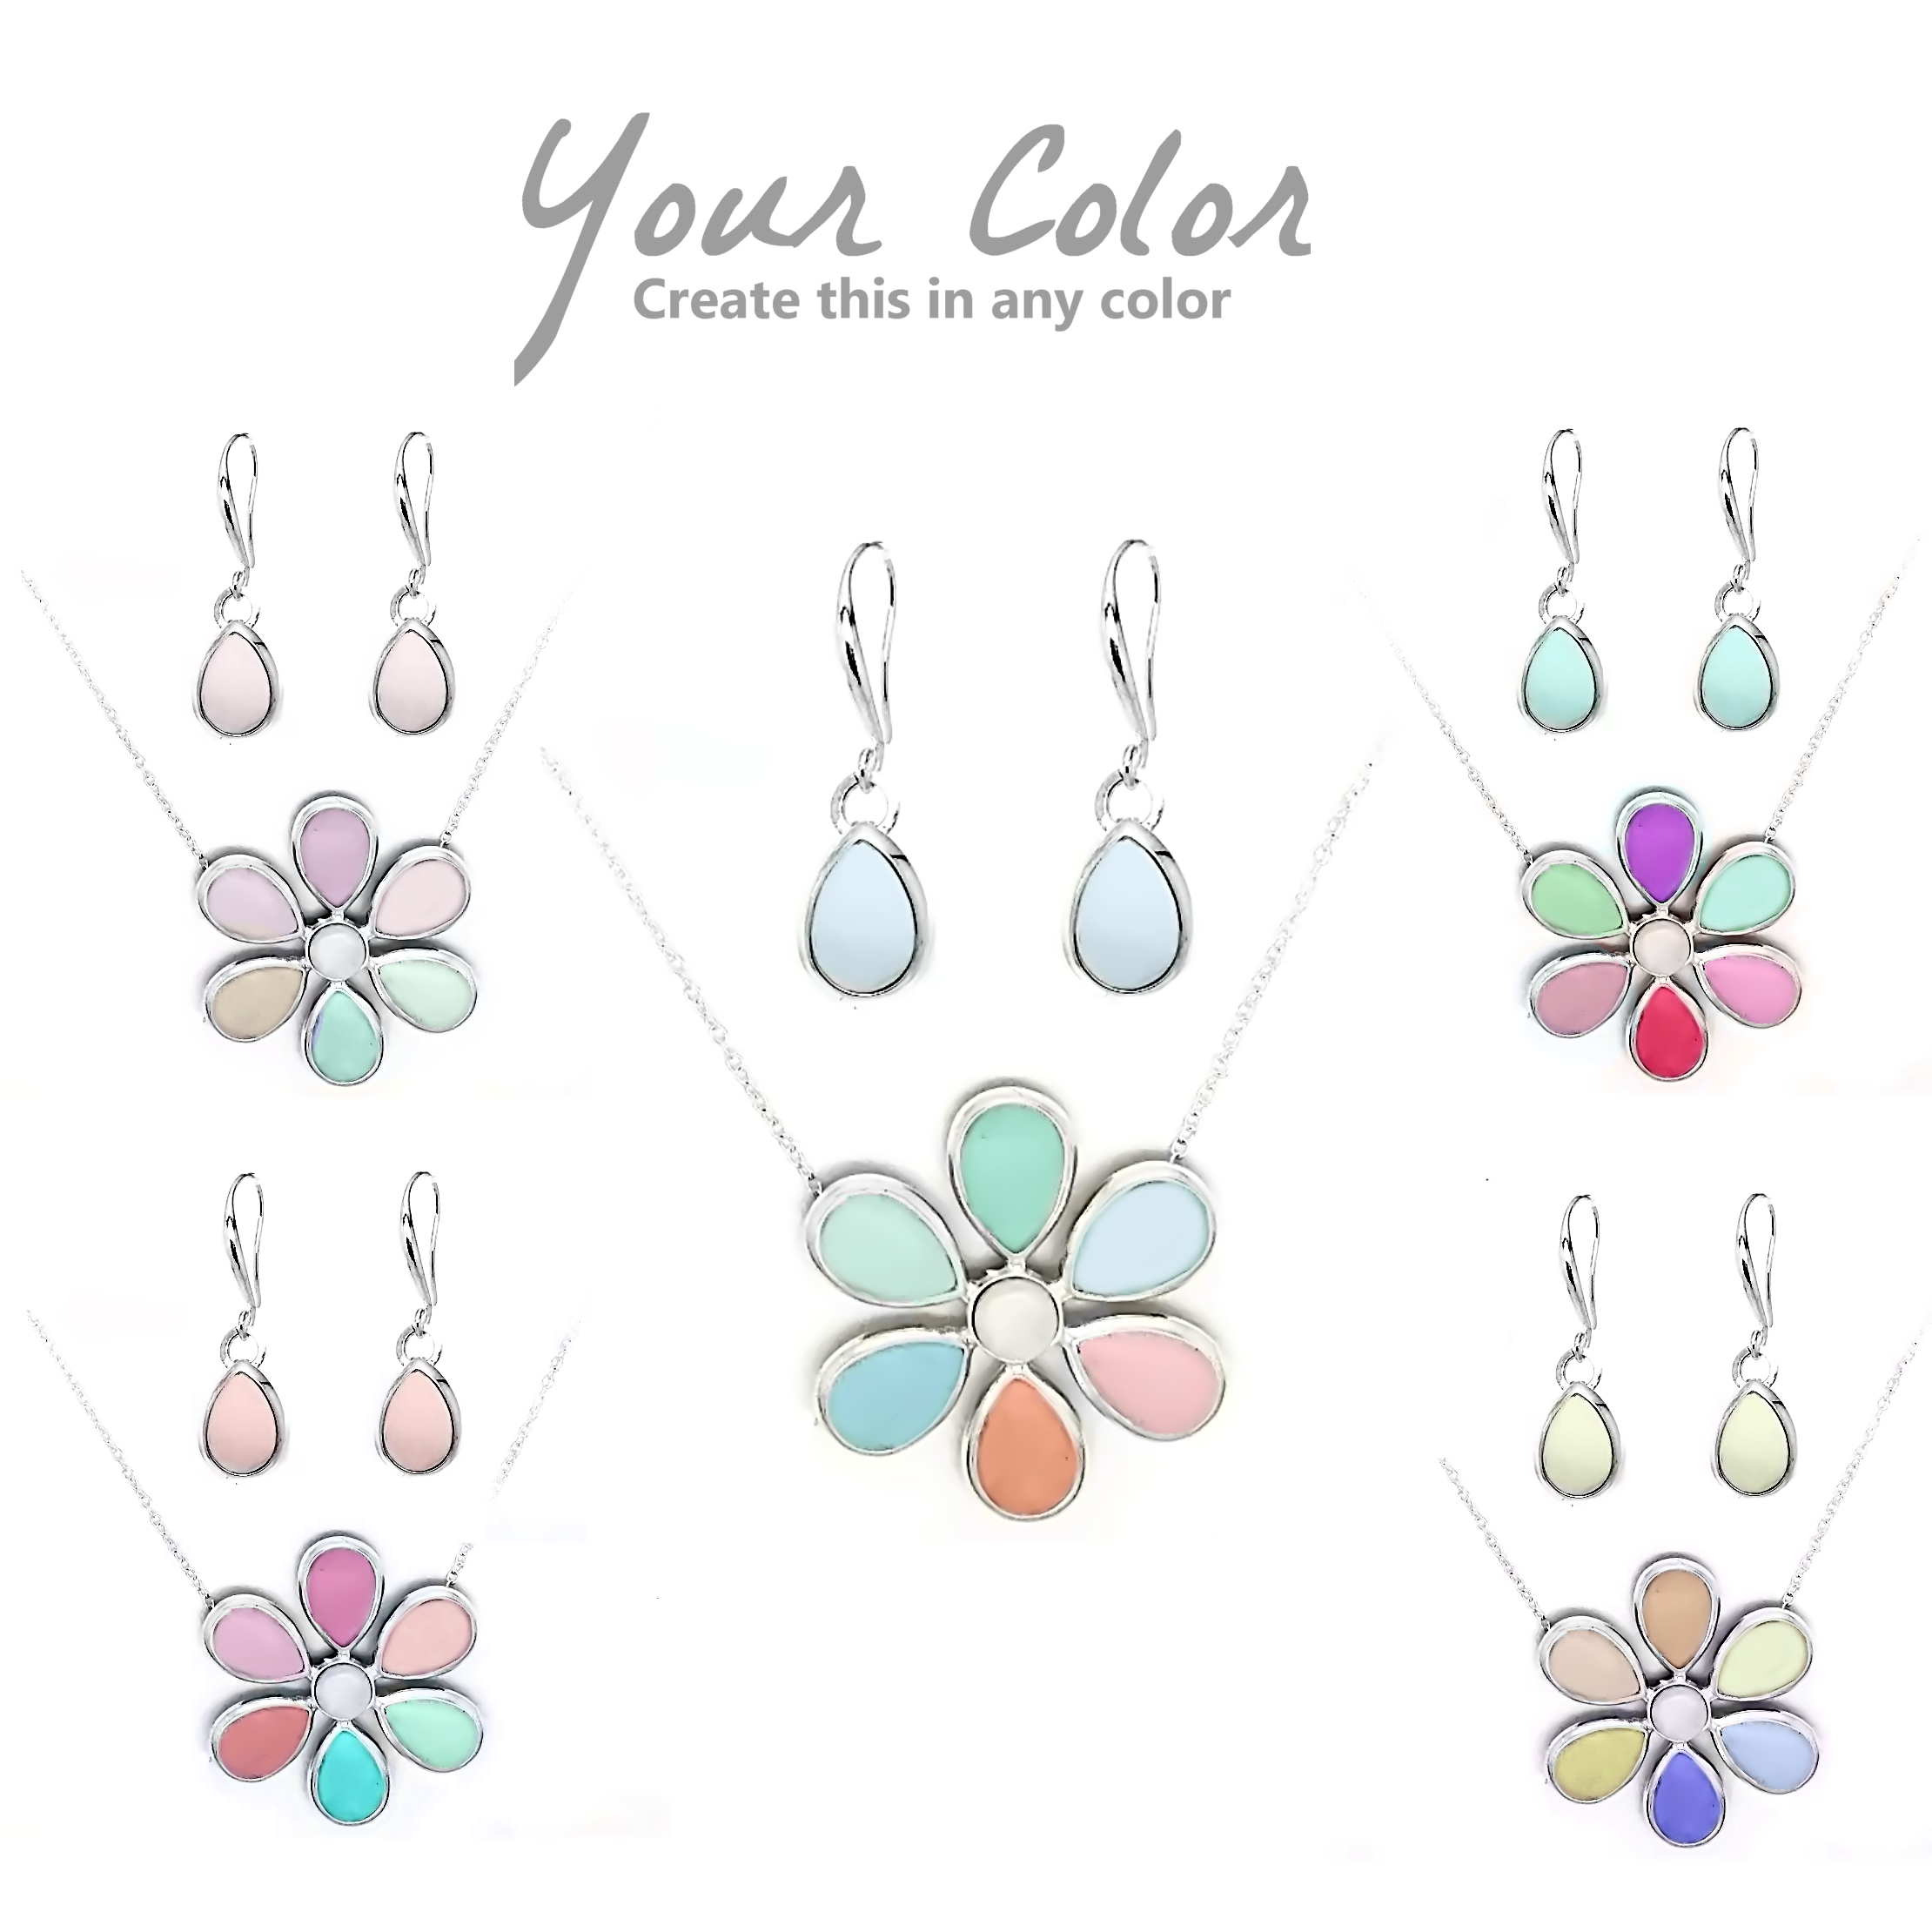 A Pretty Petals Necklace and Earrings Set  DIY Jewelry Making Virtual Event experience project by Yaymaker